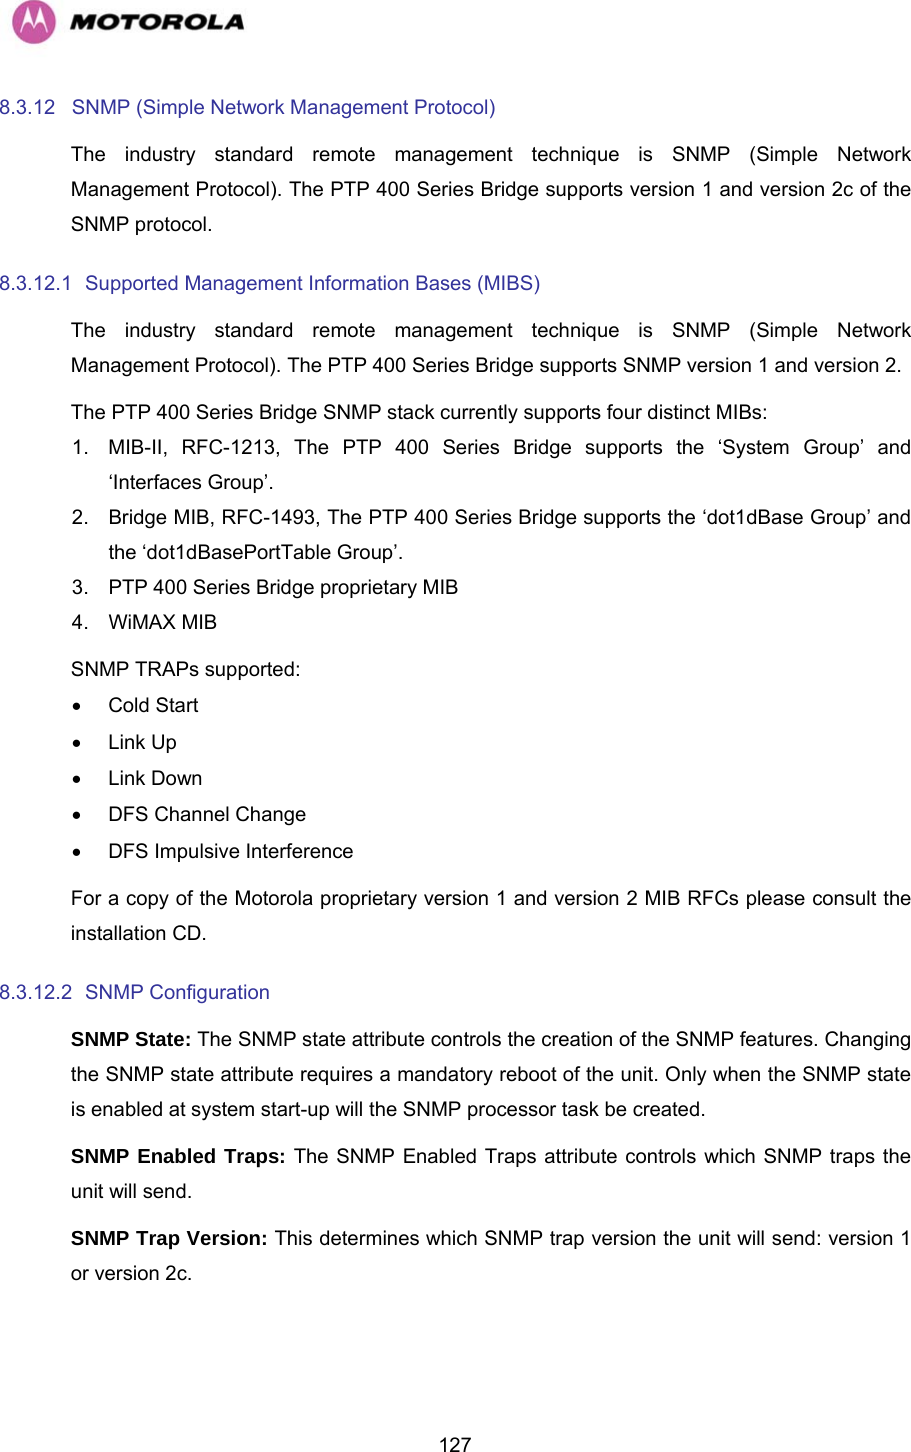   1278.3.12  SNMP (Simple Network Management Protocol)  The industry standard remote management technique is SNMP (Simple Network Management Protocol). The PTP 400 Series Bridge supports version 1 and version 2c of the SNMP protocol. 8.3.12.1  Supported Management Information Bases (MIBS)  The industry standard remote management technique is SNMP (Simple Network Management Protocol). The PTP 400 Series Bridge supports SNMP version 1 and version 2. The PTP 400 Series Bridge SNMP stack currently supports four distinct MIBs: 1.  MIB-II, RFC-1213, The PTP 400 Series Bridge supports the ‘System Group’ and ‘Interfaces Group’. 2.  Bridge MIB, RFC-1493, The PTP 400 Series Bridge supports the ‘dot1dBase Group’ and the ‘dot1dBasePortTable Group’. 3.  PTP 400 Series Bridge proprietary MIB 4. WiMAX MIB  SNMP TRAPs supported: • Cold Start • Link Up • Link Down •  DFS Channel Change  •  DFS Impulsive Interference For a copy of the Motorola proprietary version 1 and version 2 MIB RFCs please consult the installation CD. 8.3.12.2  SNMP Configuration  SNMP State: The SNMP state attribute controls the creation of the SNMP features. Changing the SNMP state attribute requires a mandatory reboot of the unit. Only when the SNMP state is enabled at system start-up will the SNMP processor task be created. SNMP Enabled Traps: The SNMP Enabled Traps attribute controls which SNMP traps the unit will send. SNMP Trap Version: This determines which SNMP trap version the unit will send: version 1 or version 2c. 